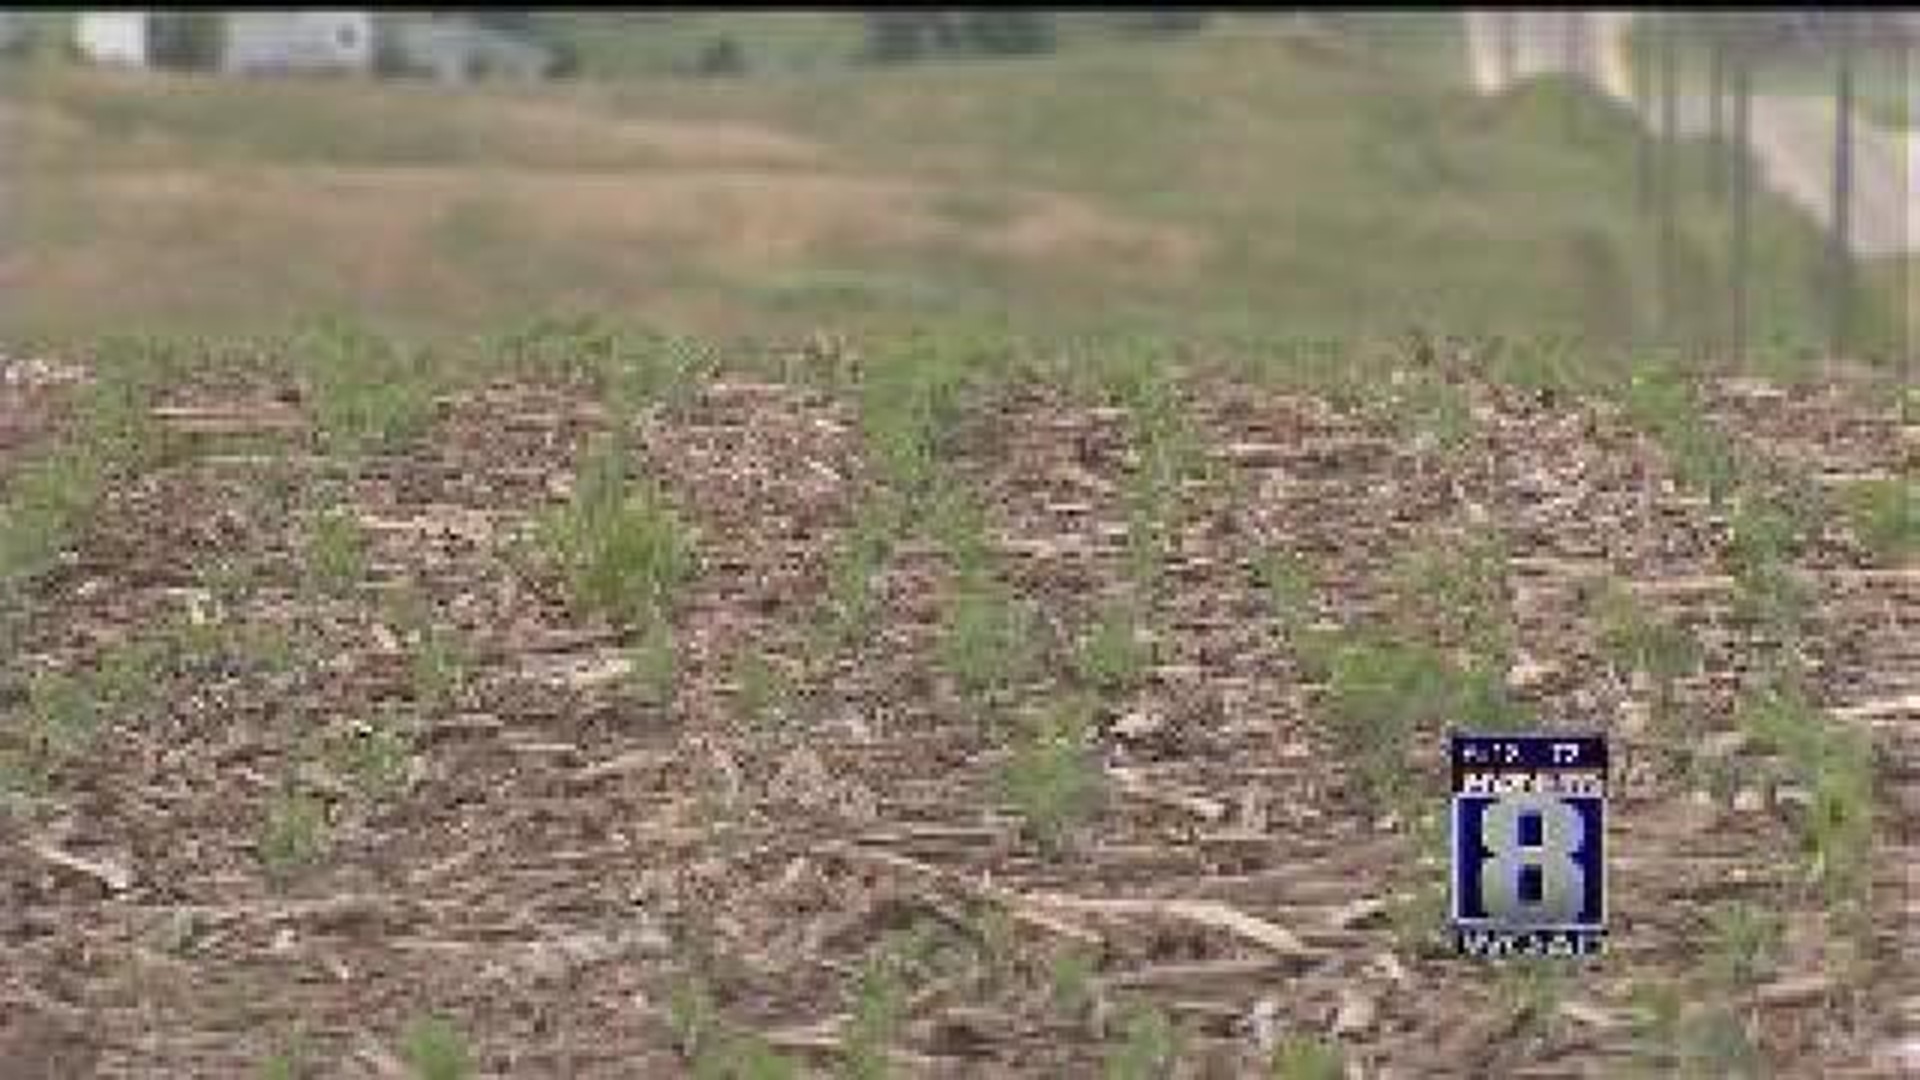 Ag in the AM: More Rain Needed